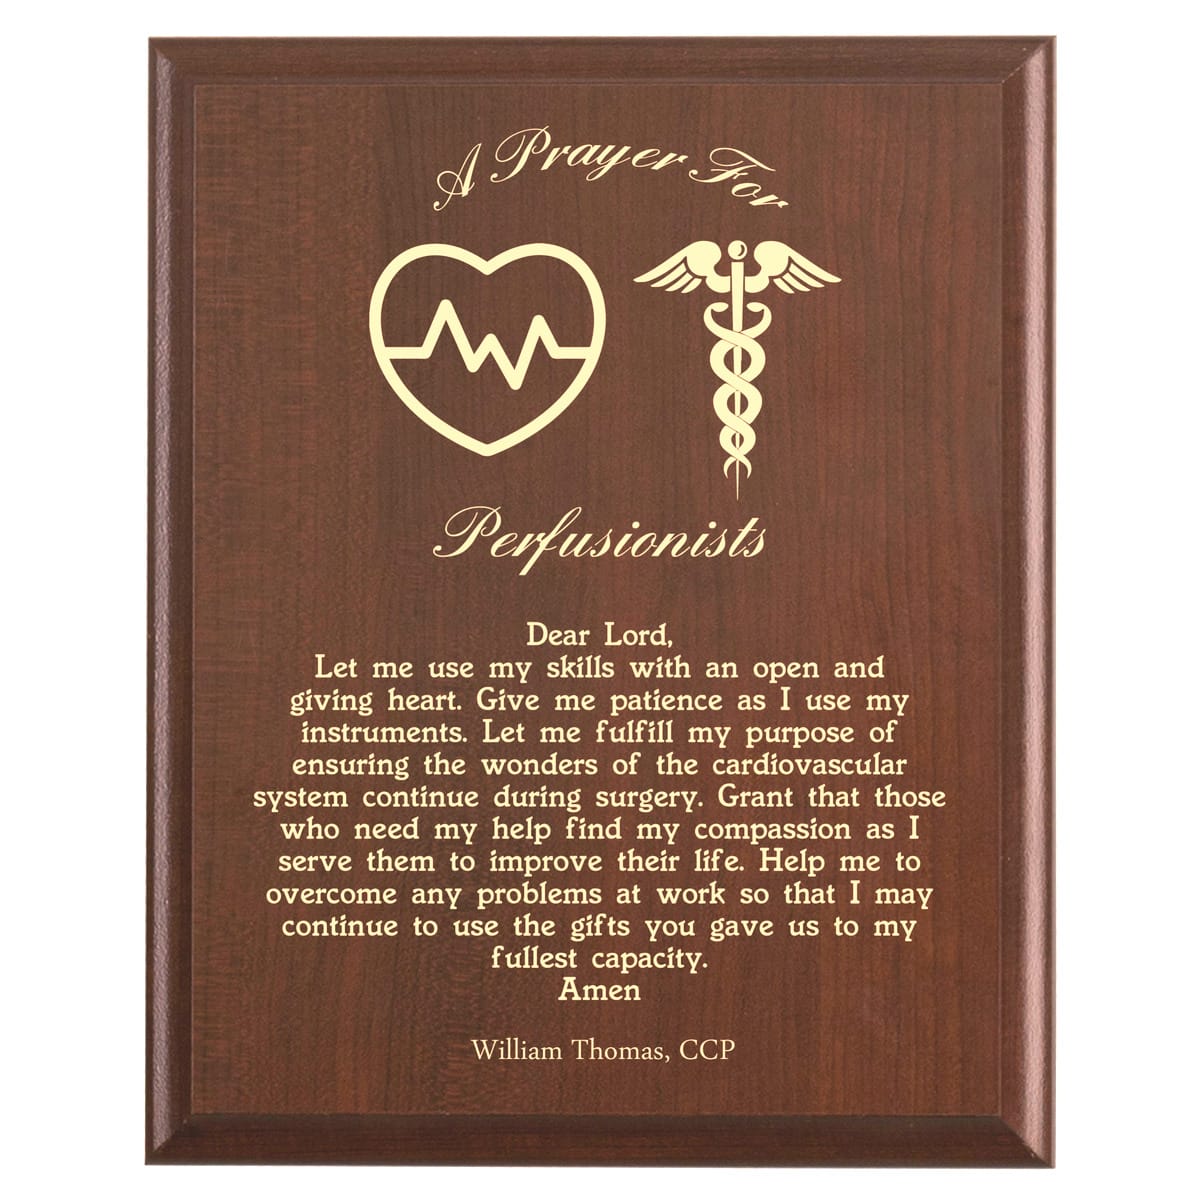 Plaque photo: Perfusionist Prayer Plaque design with free personalization. Wood style finish with customized text.